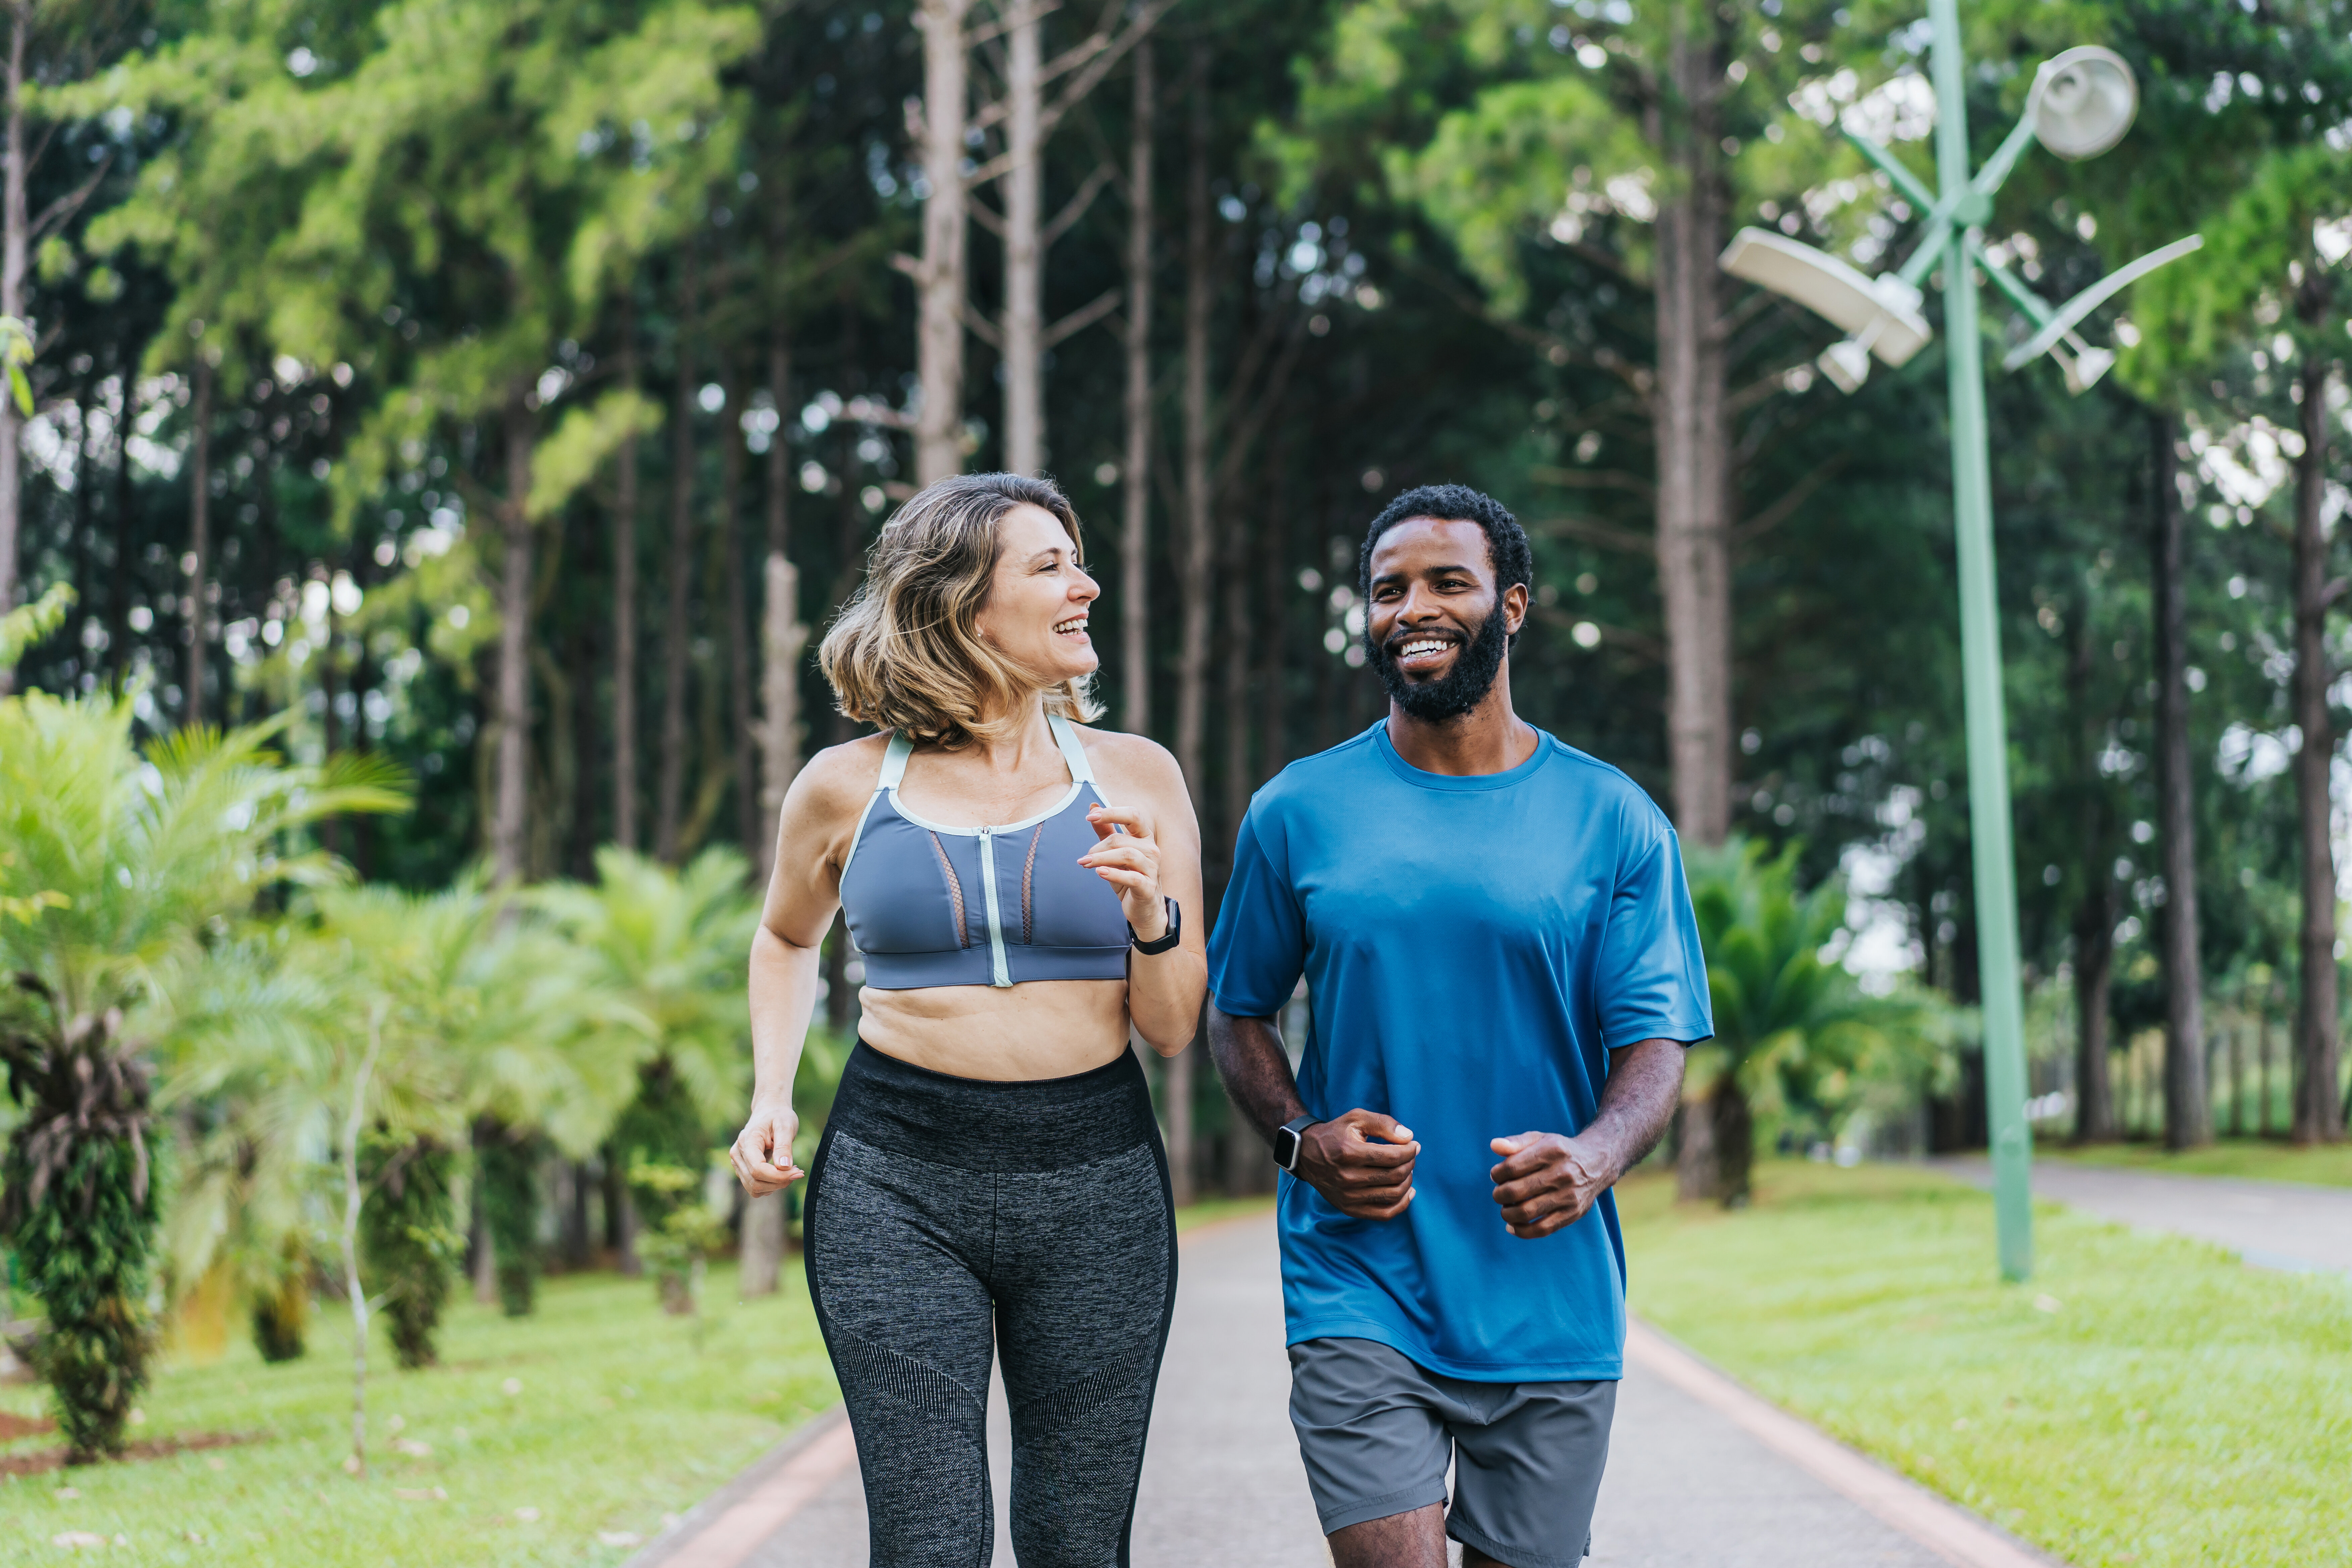 Two people jogging together in a park, smiling and conversing